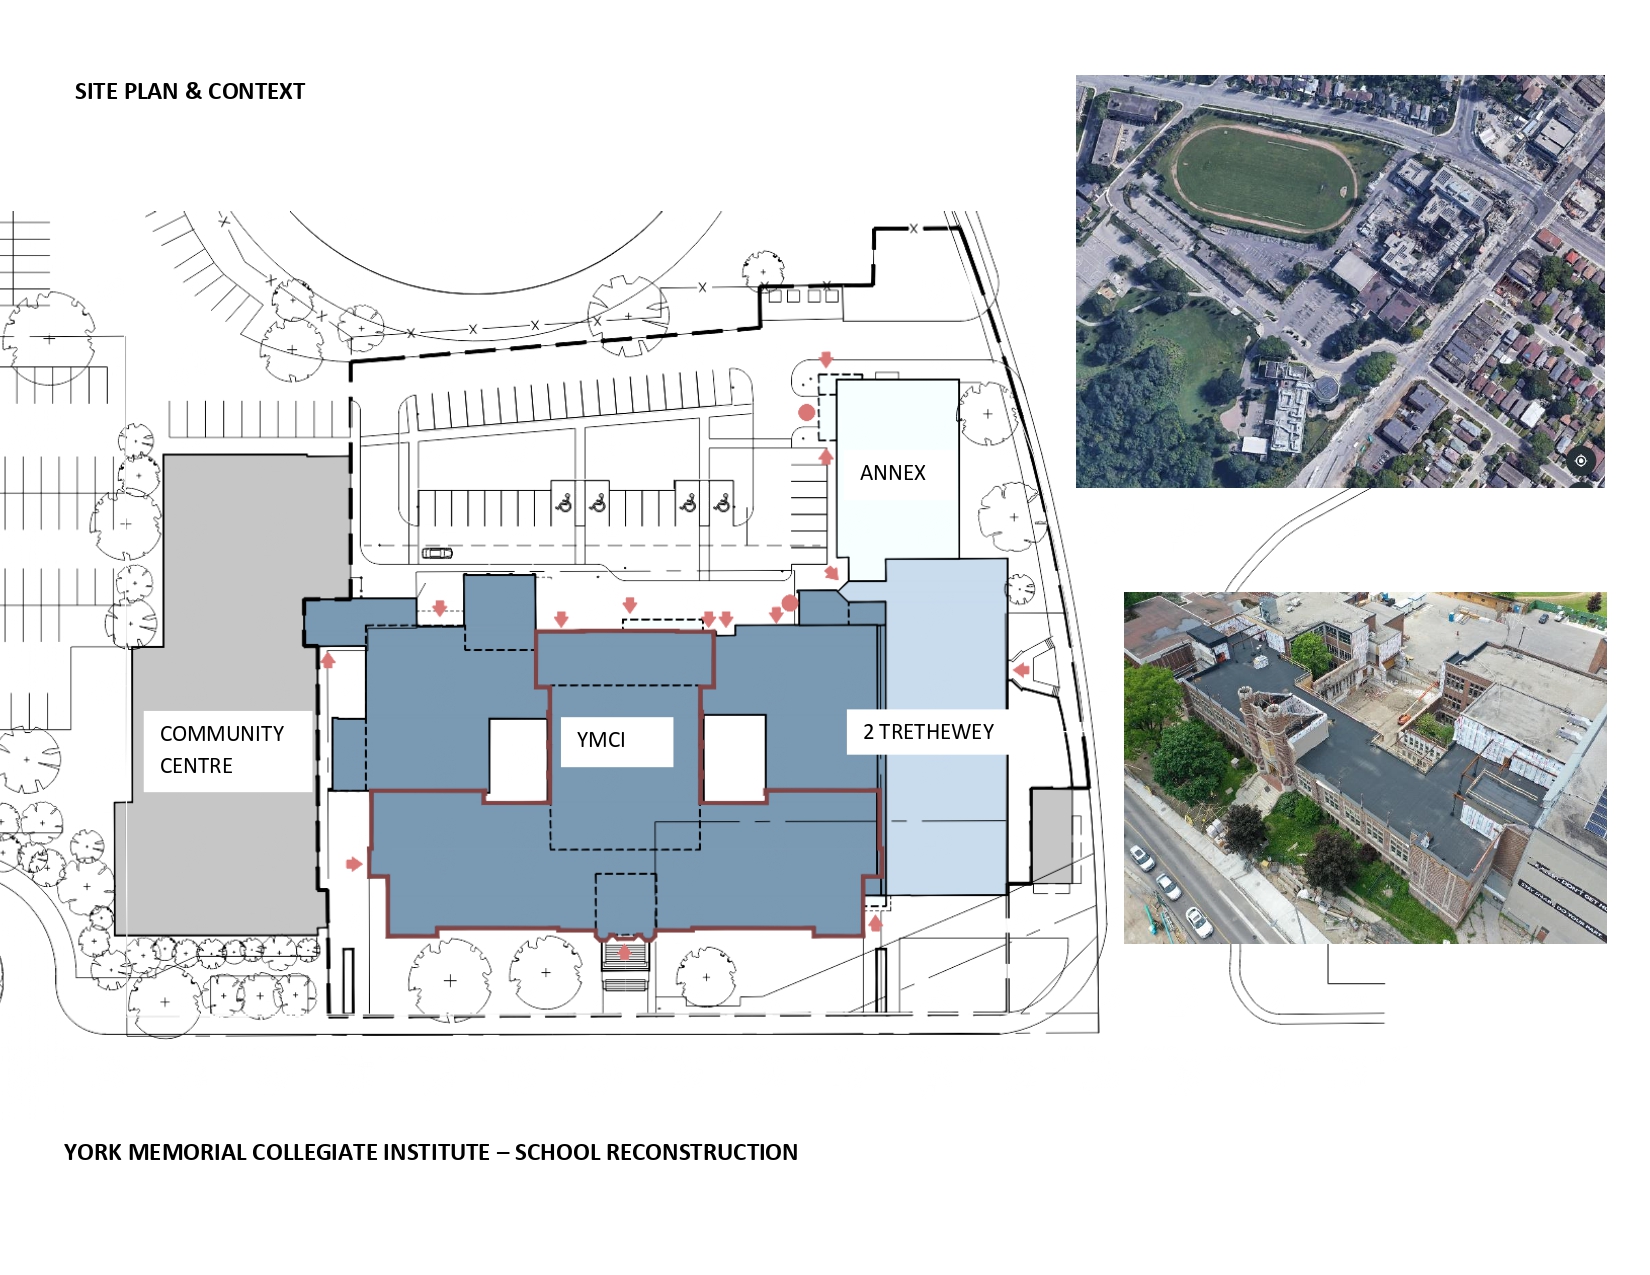 Architectural site plan looking down from above depicting the school & adjacent spaces. Open Gallery